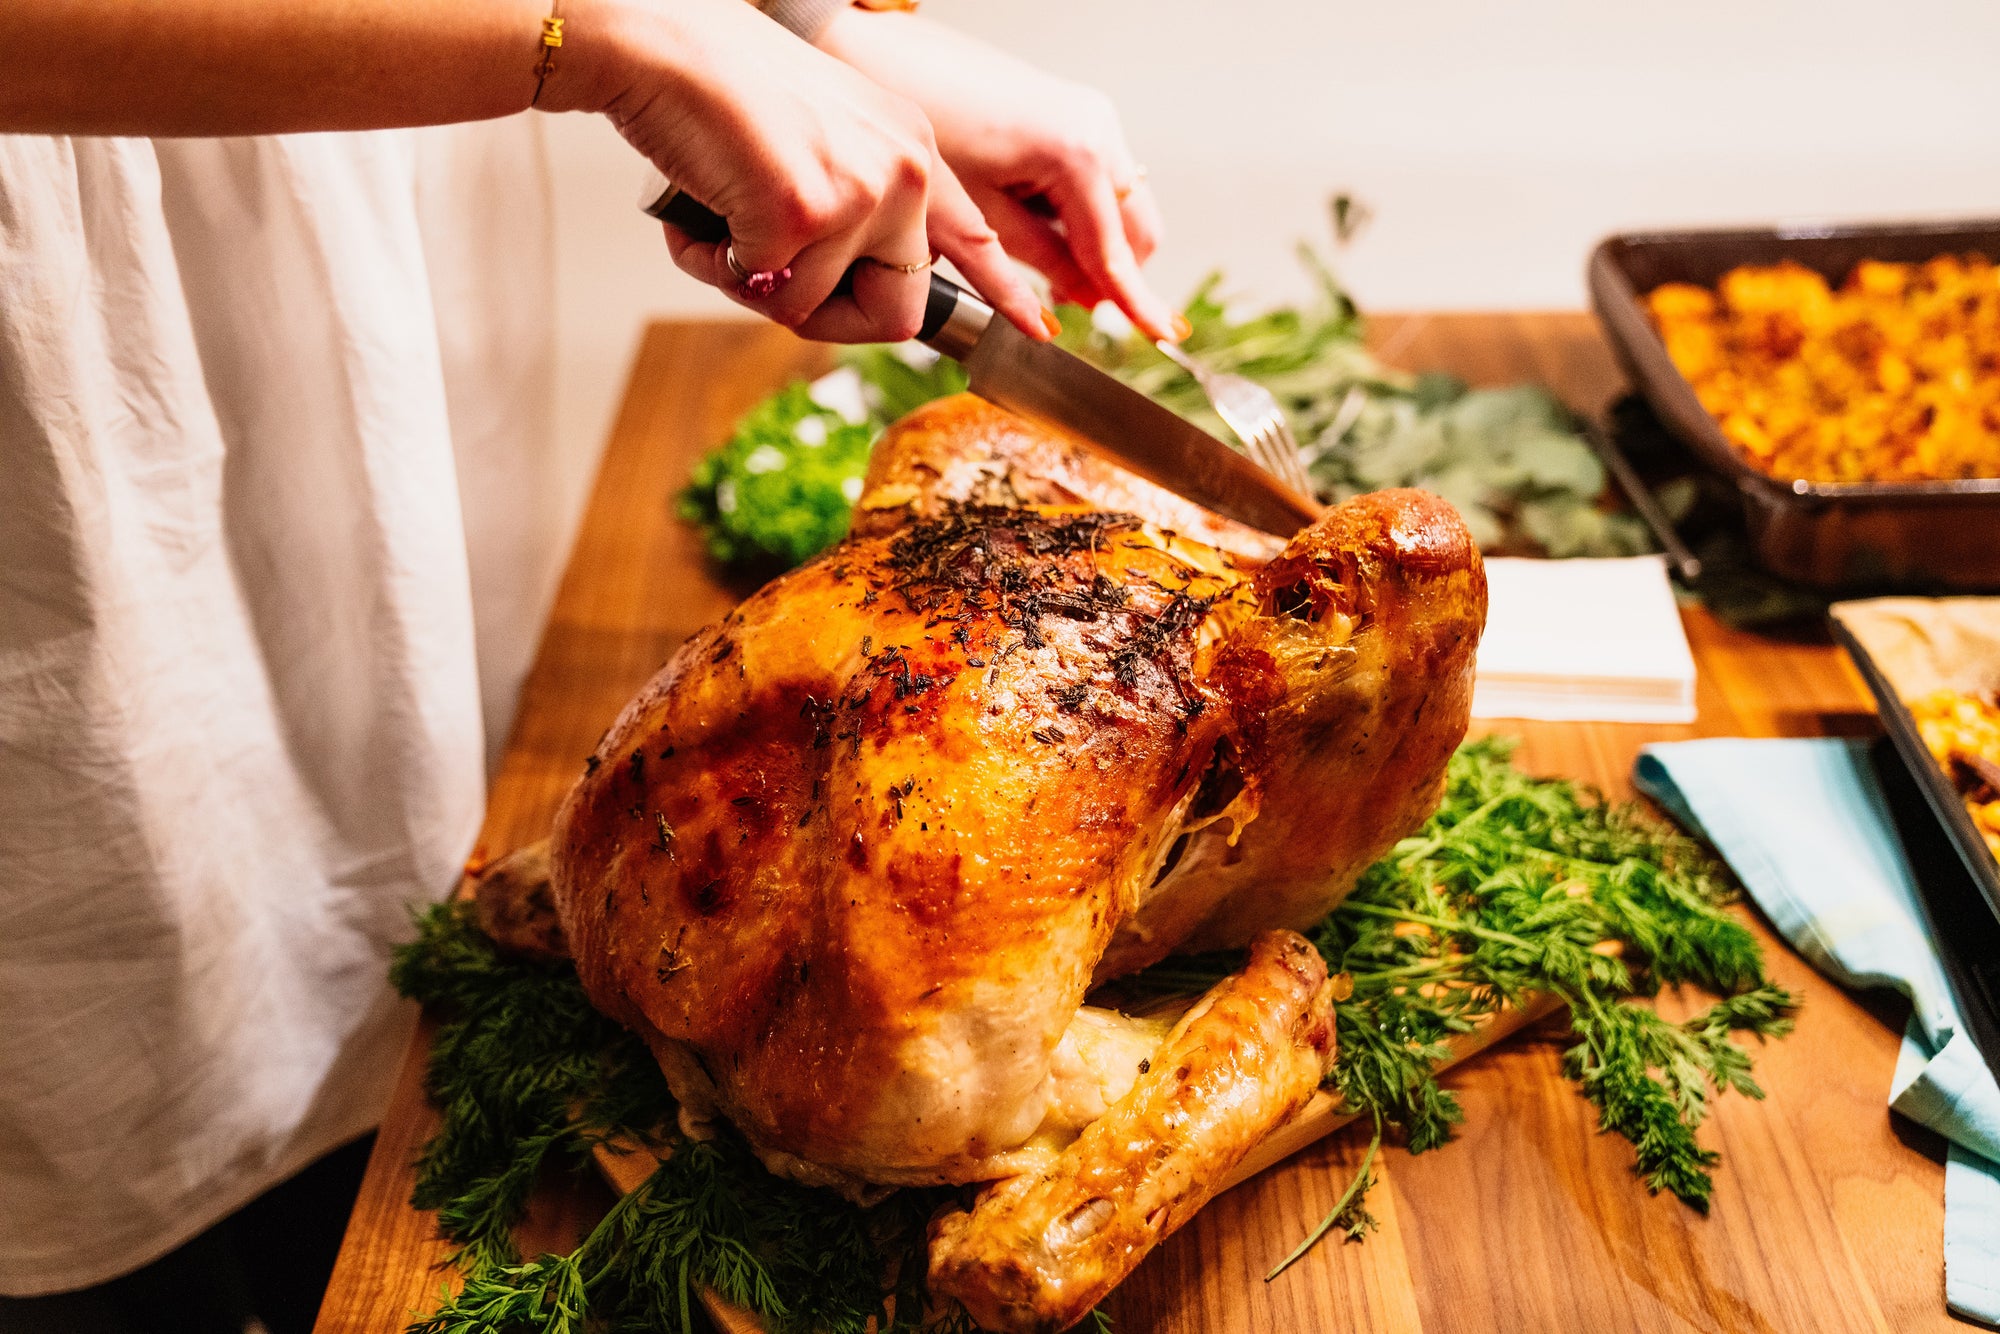 Epicurean Butter’s Guide to a Flavorful Thanksgiving Dinner